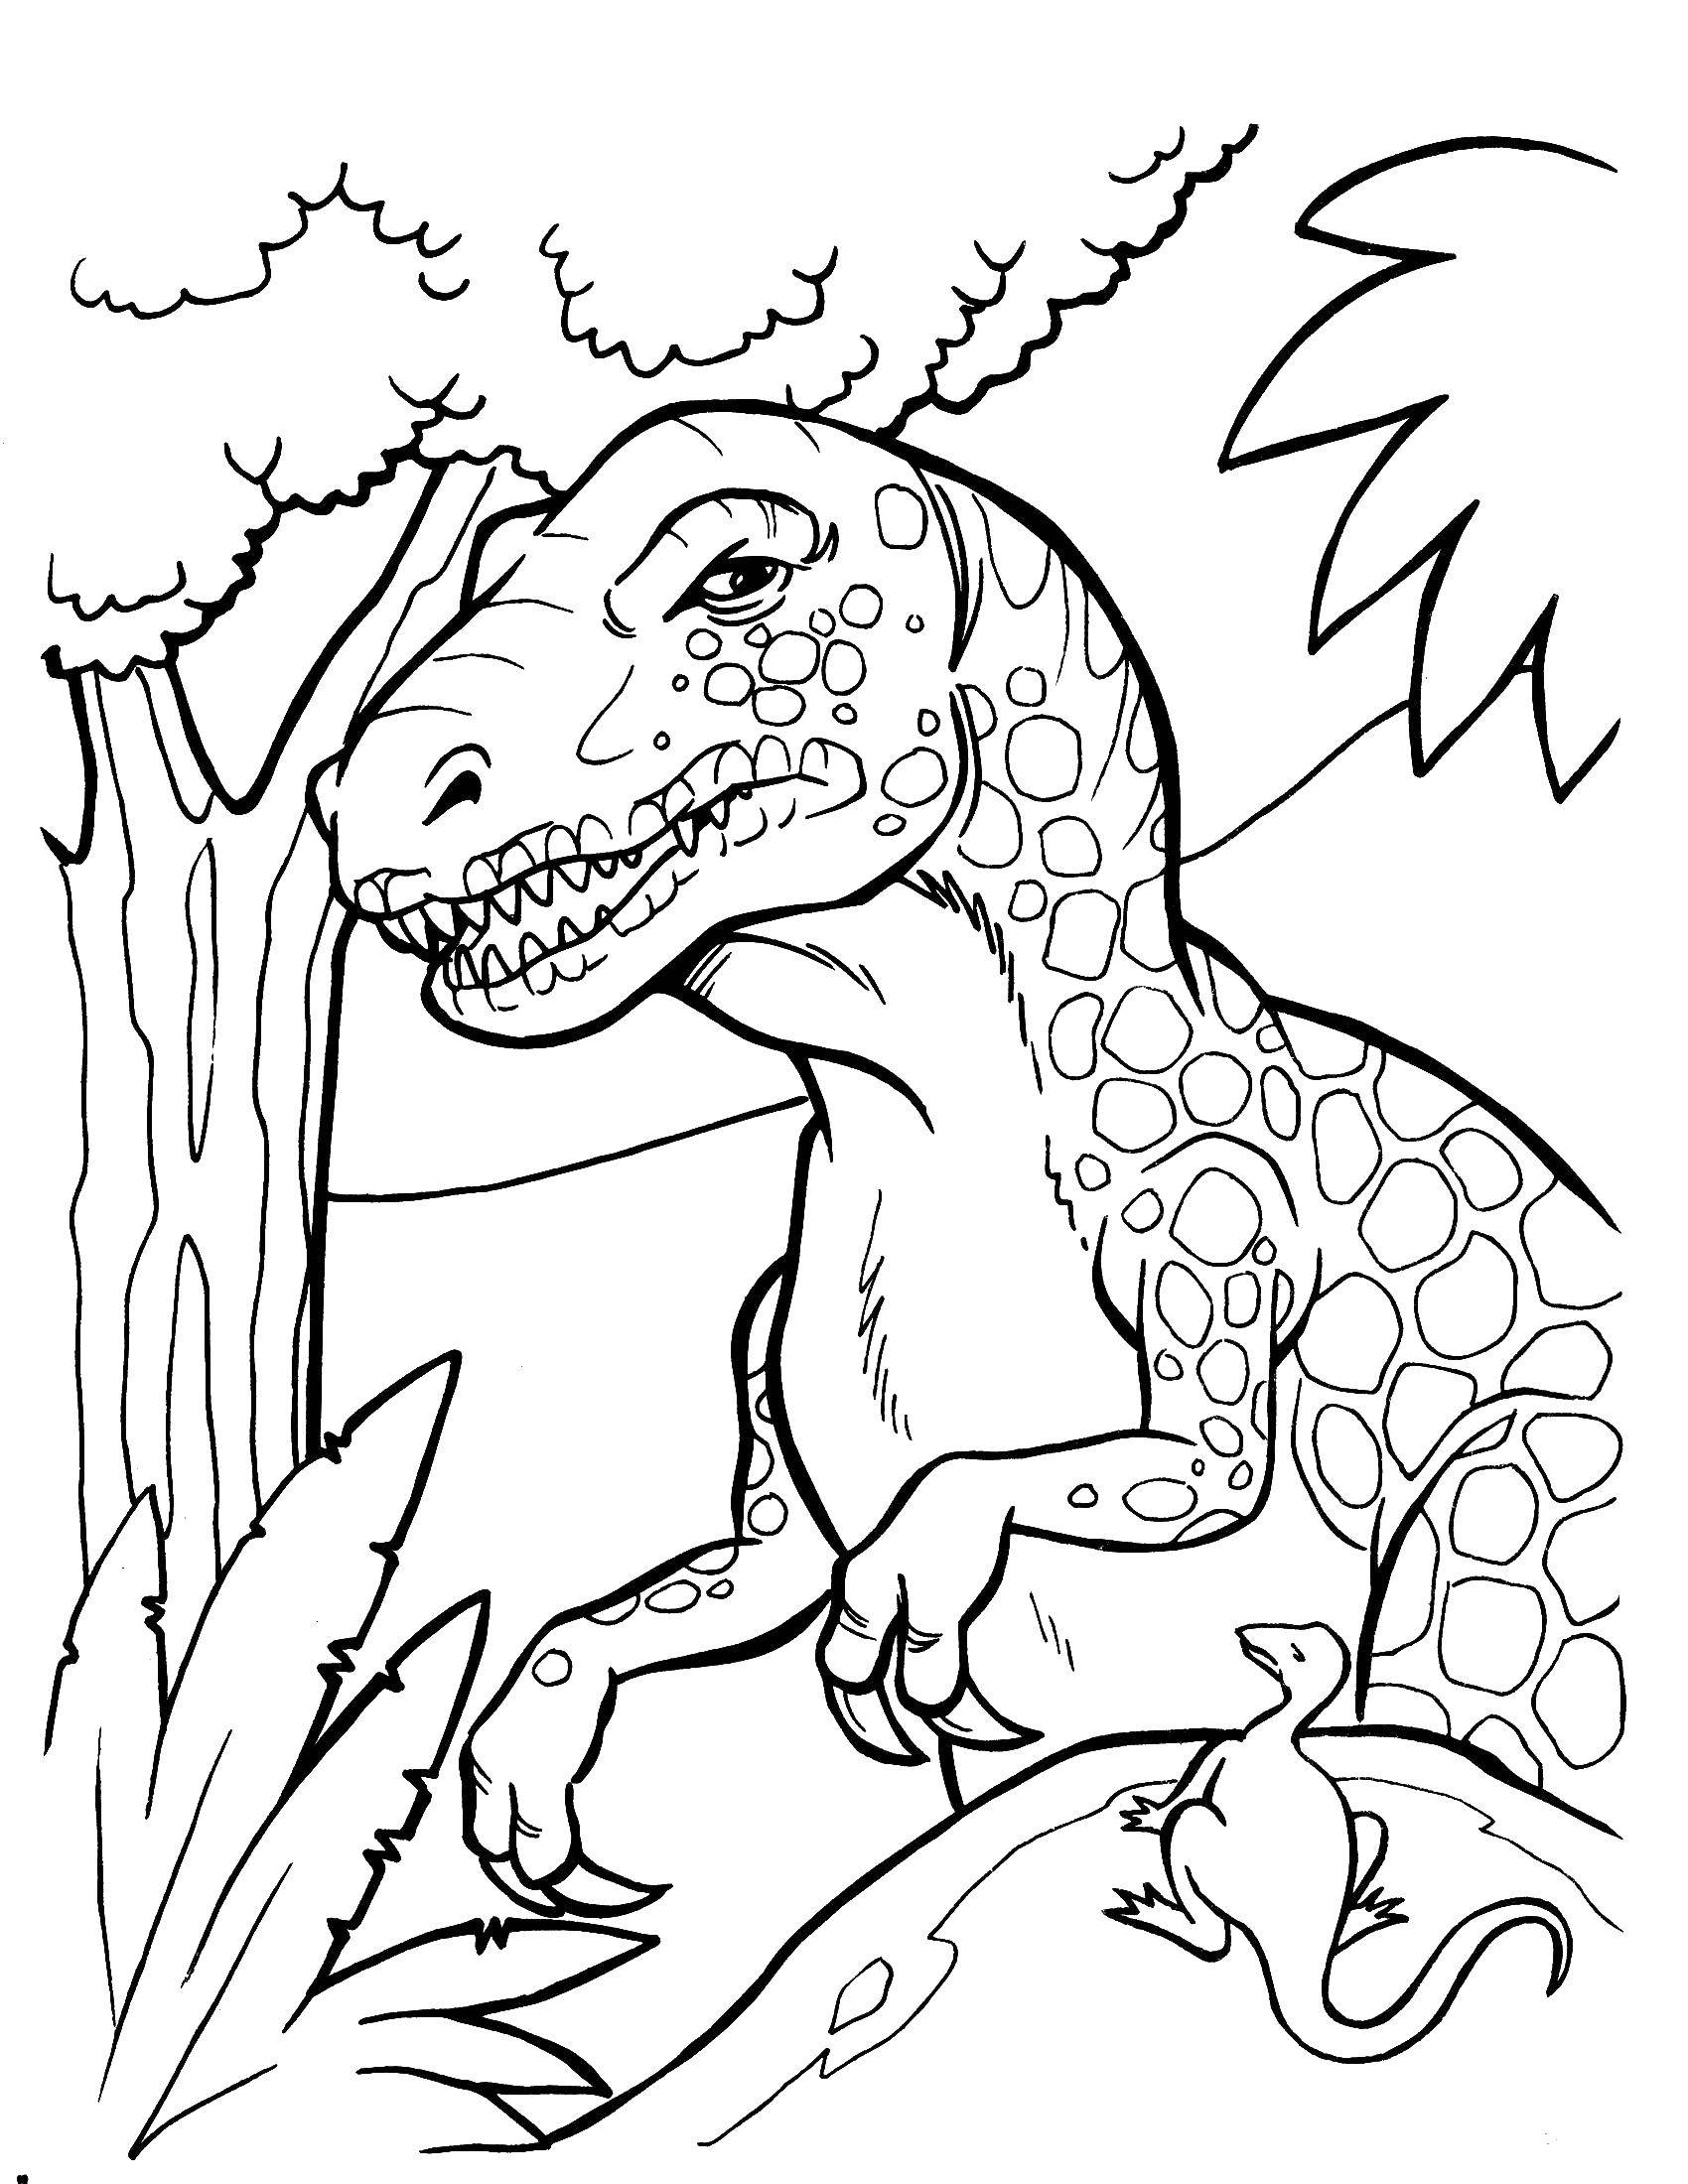 Coloring The dinosaur and the tree. Category dinosaur. Tags:  dinosaur, tree, leaves.